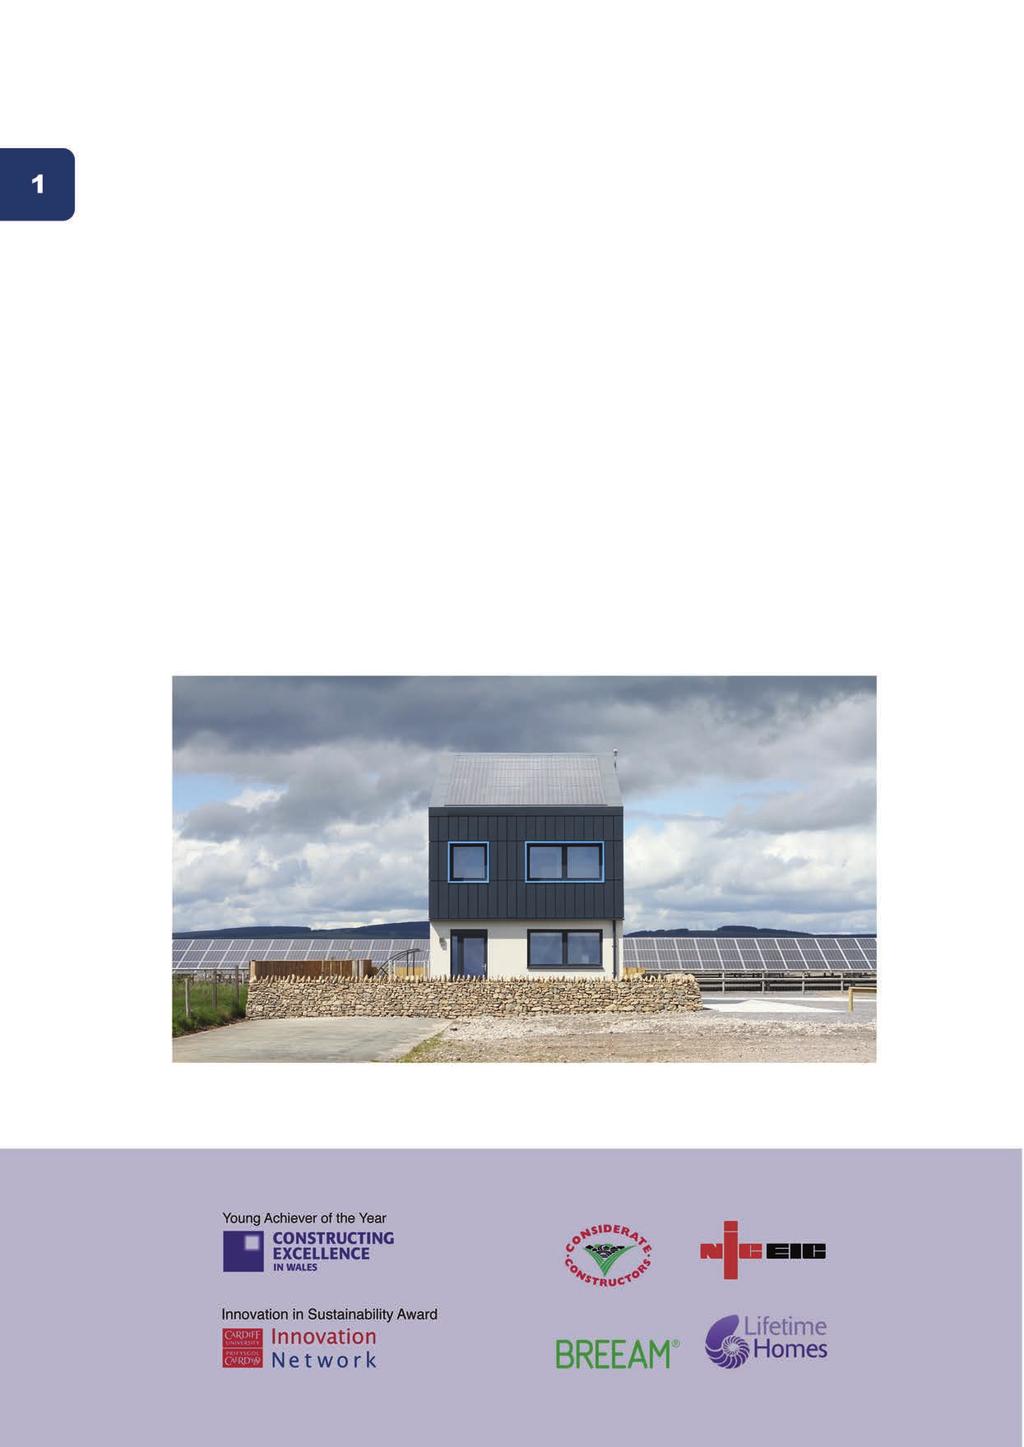 BACKGROUND The Welsh School of Architecture has designed and built Wales first low cost energy positive house.